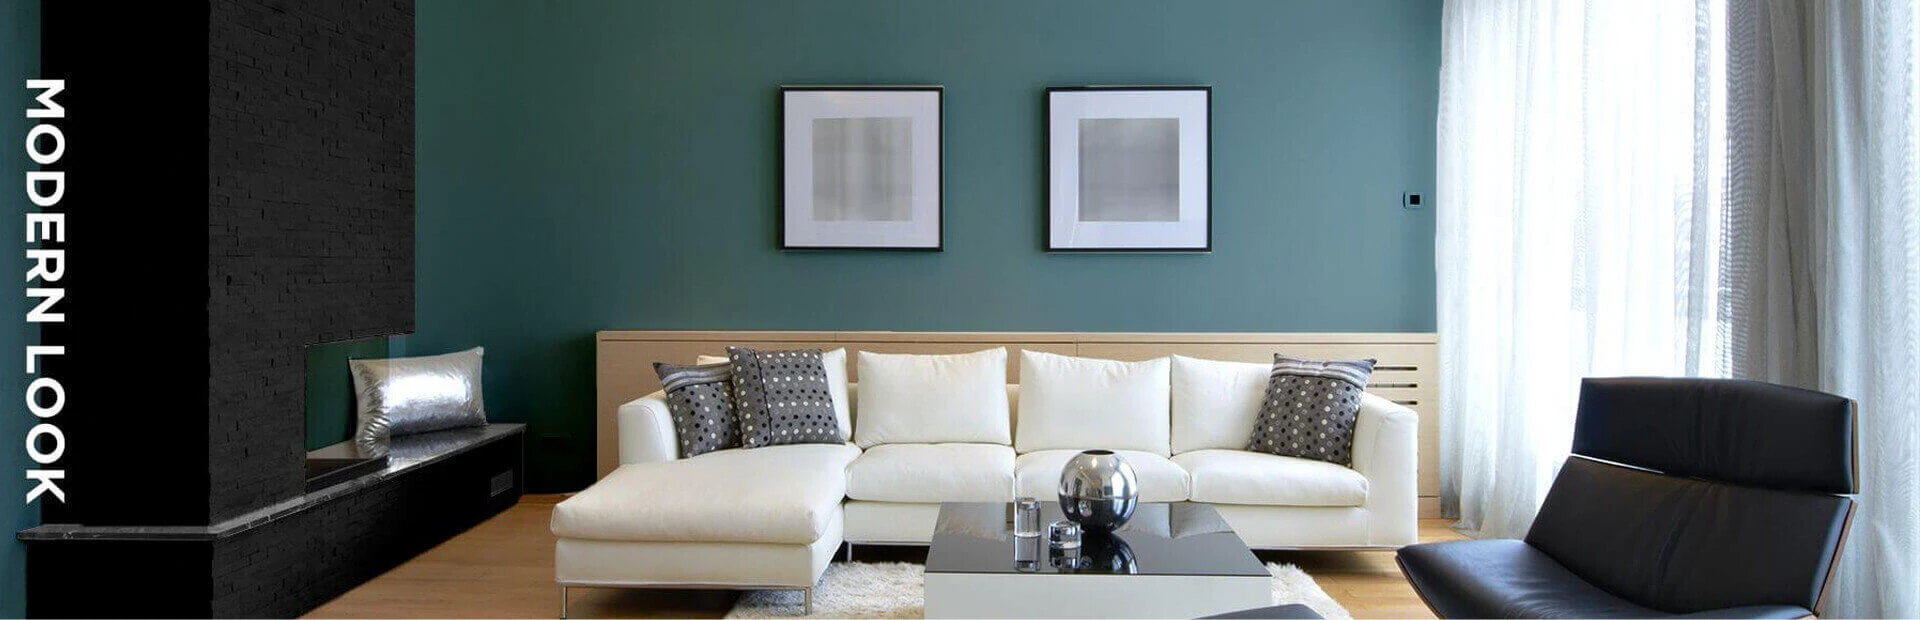 Living Room in dark neutral colors of featuring furniture and paintings on walls.